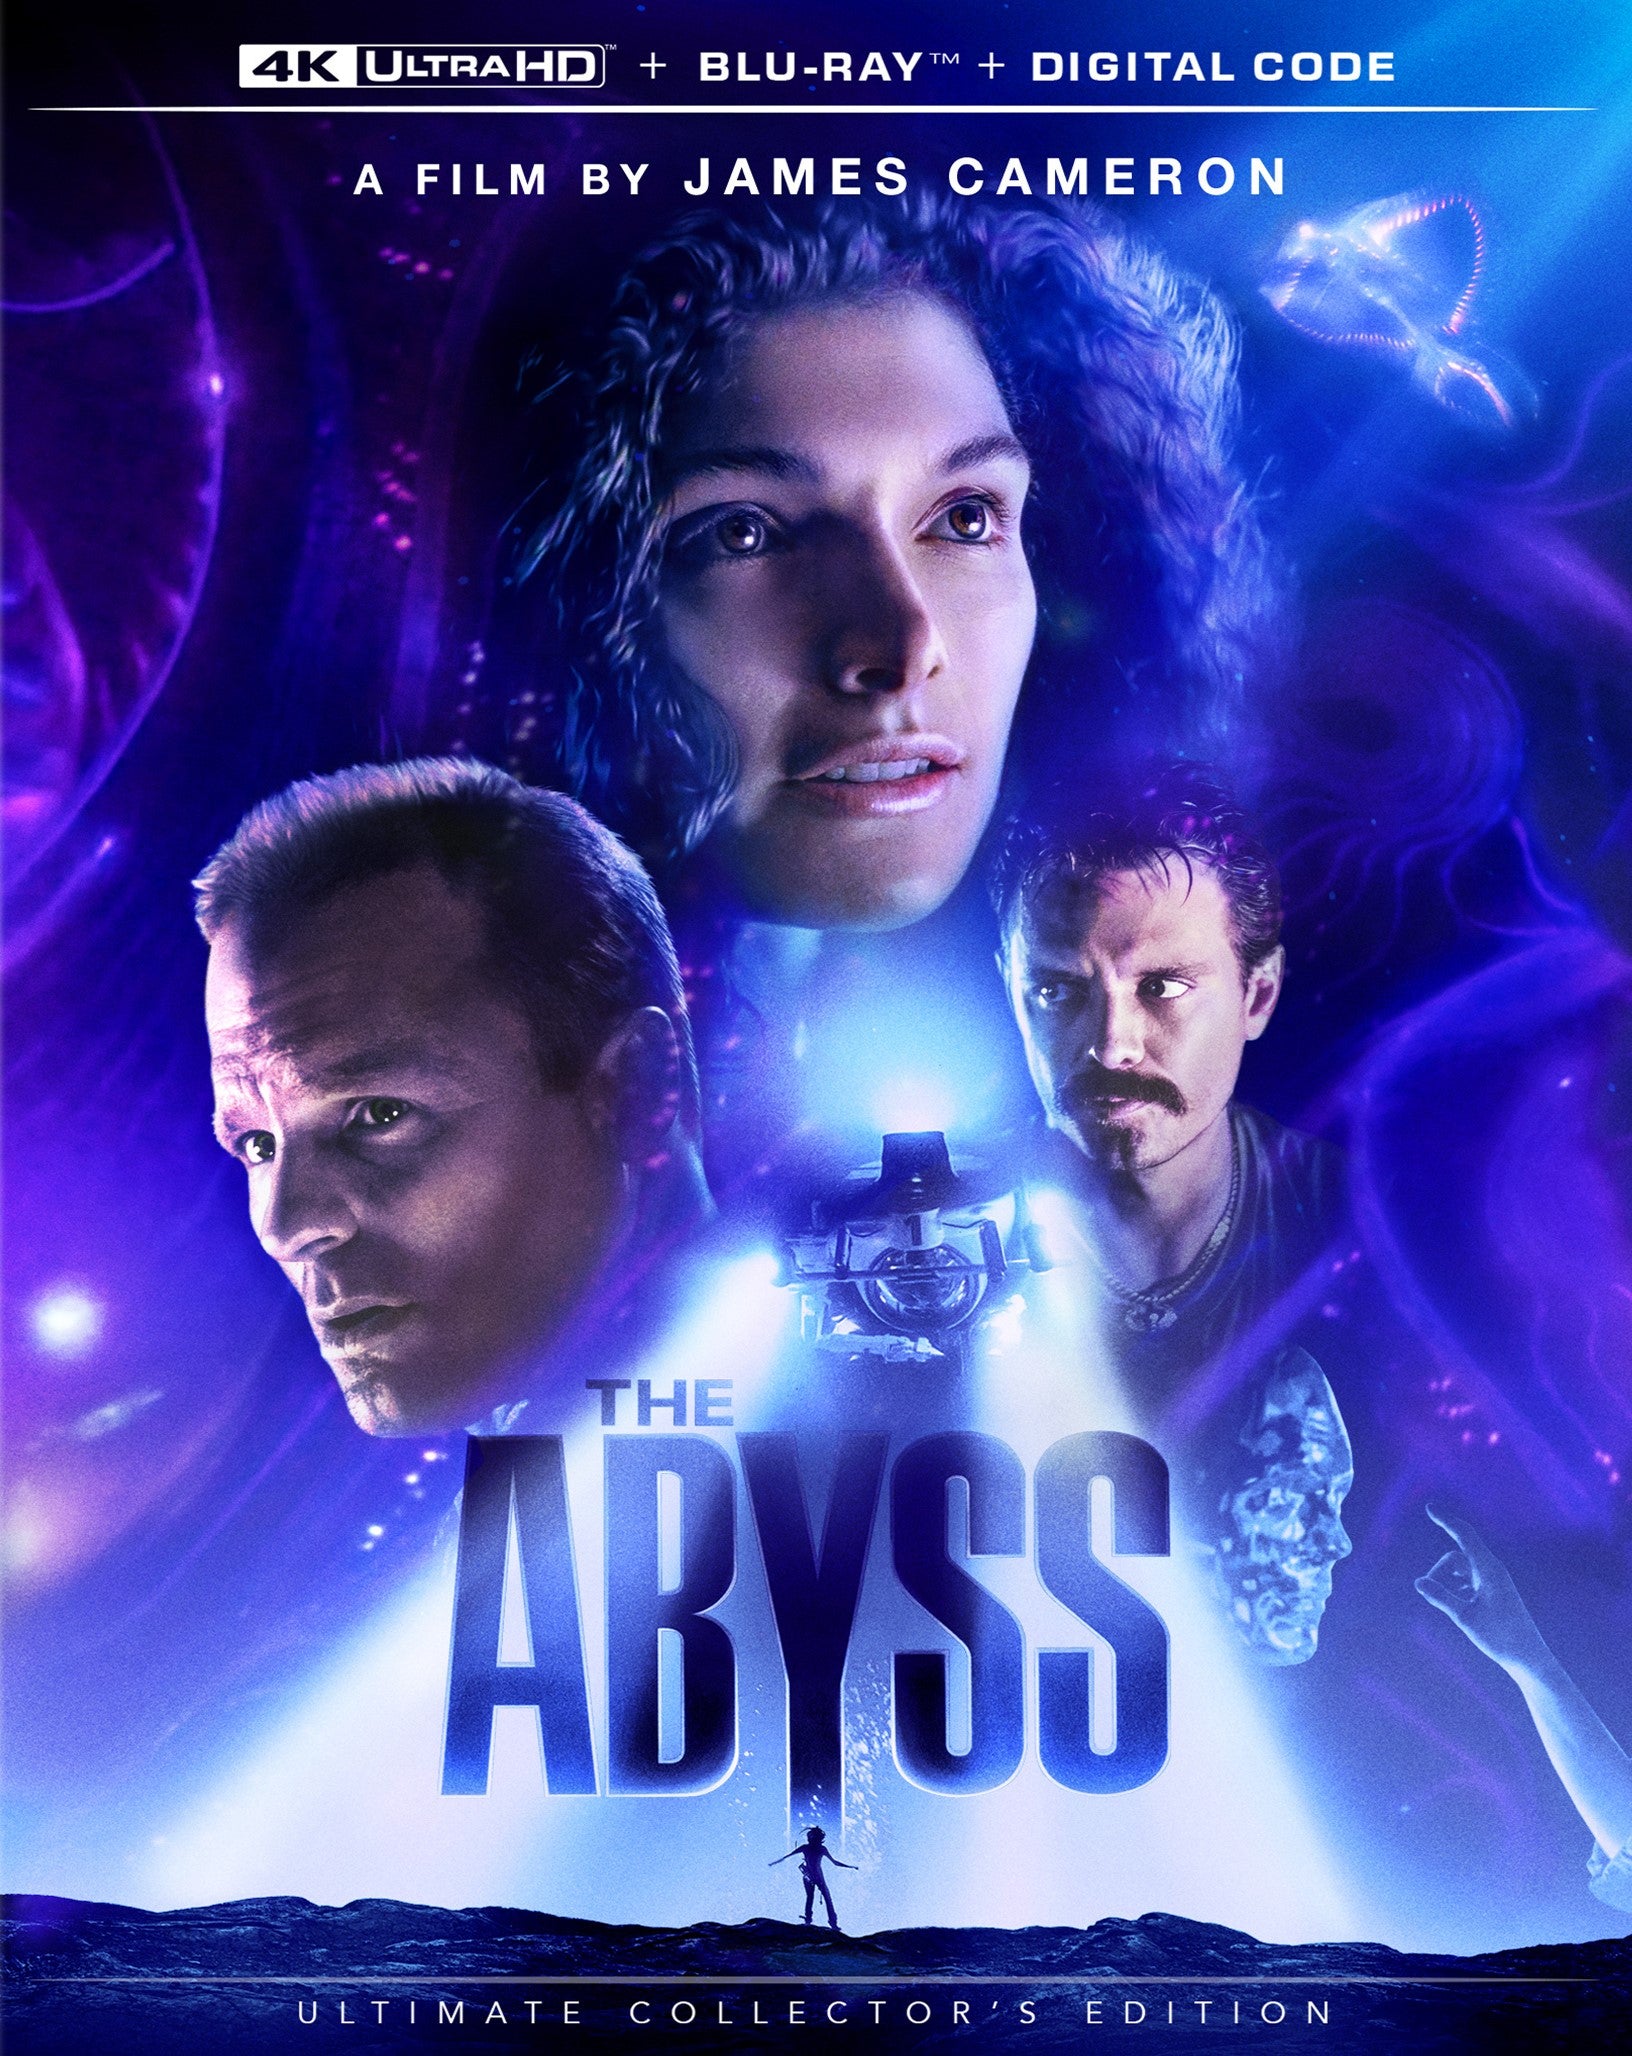 THE ABYSS 4K UHD/BLU-RAY